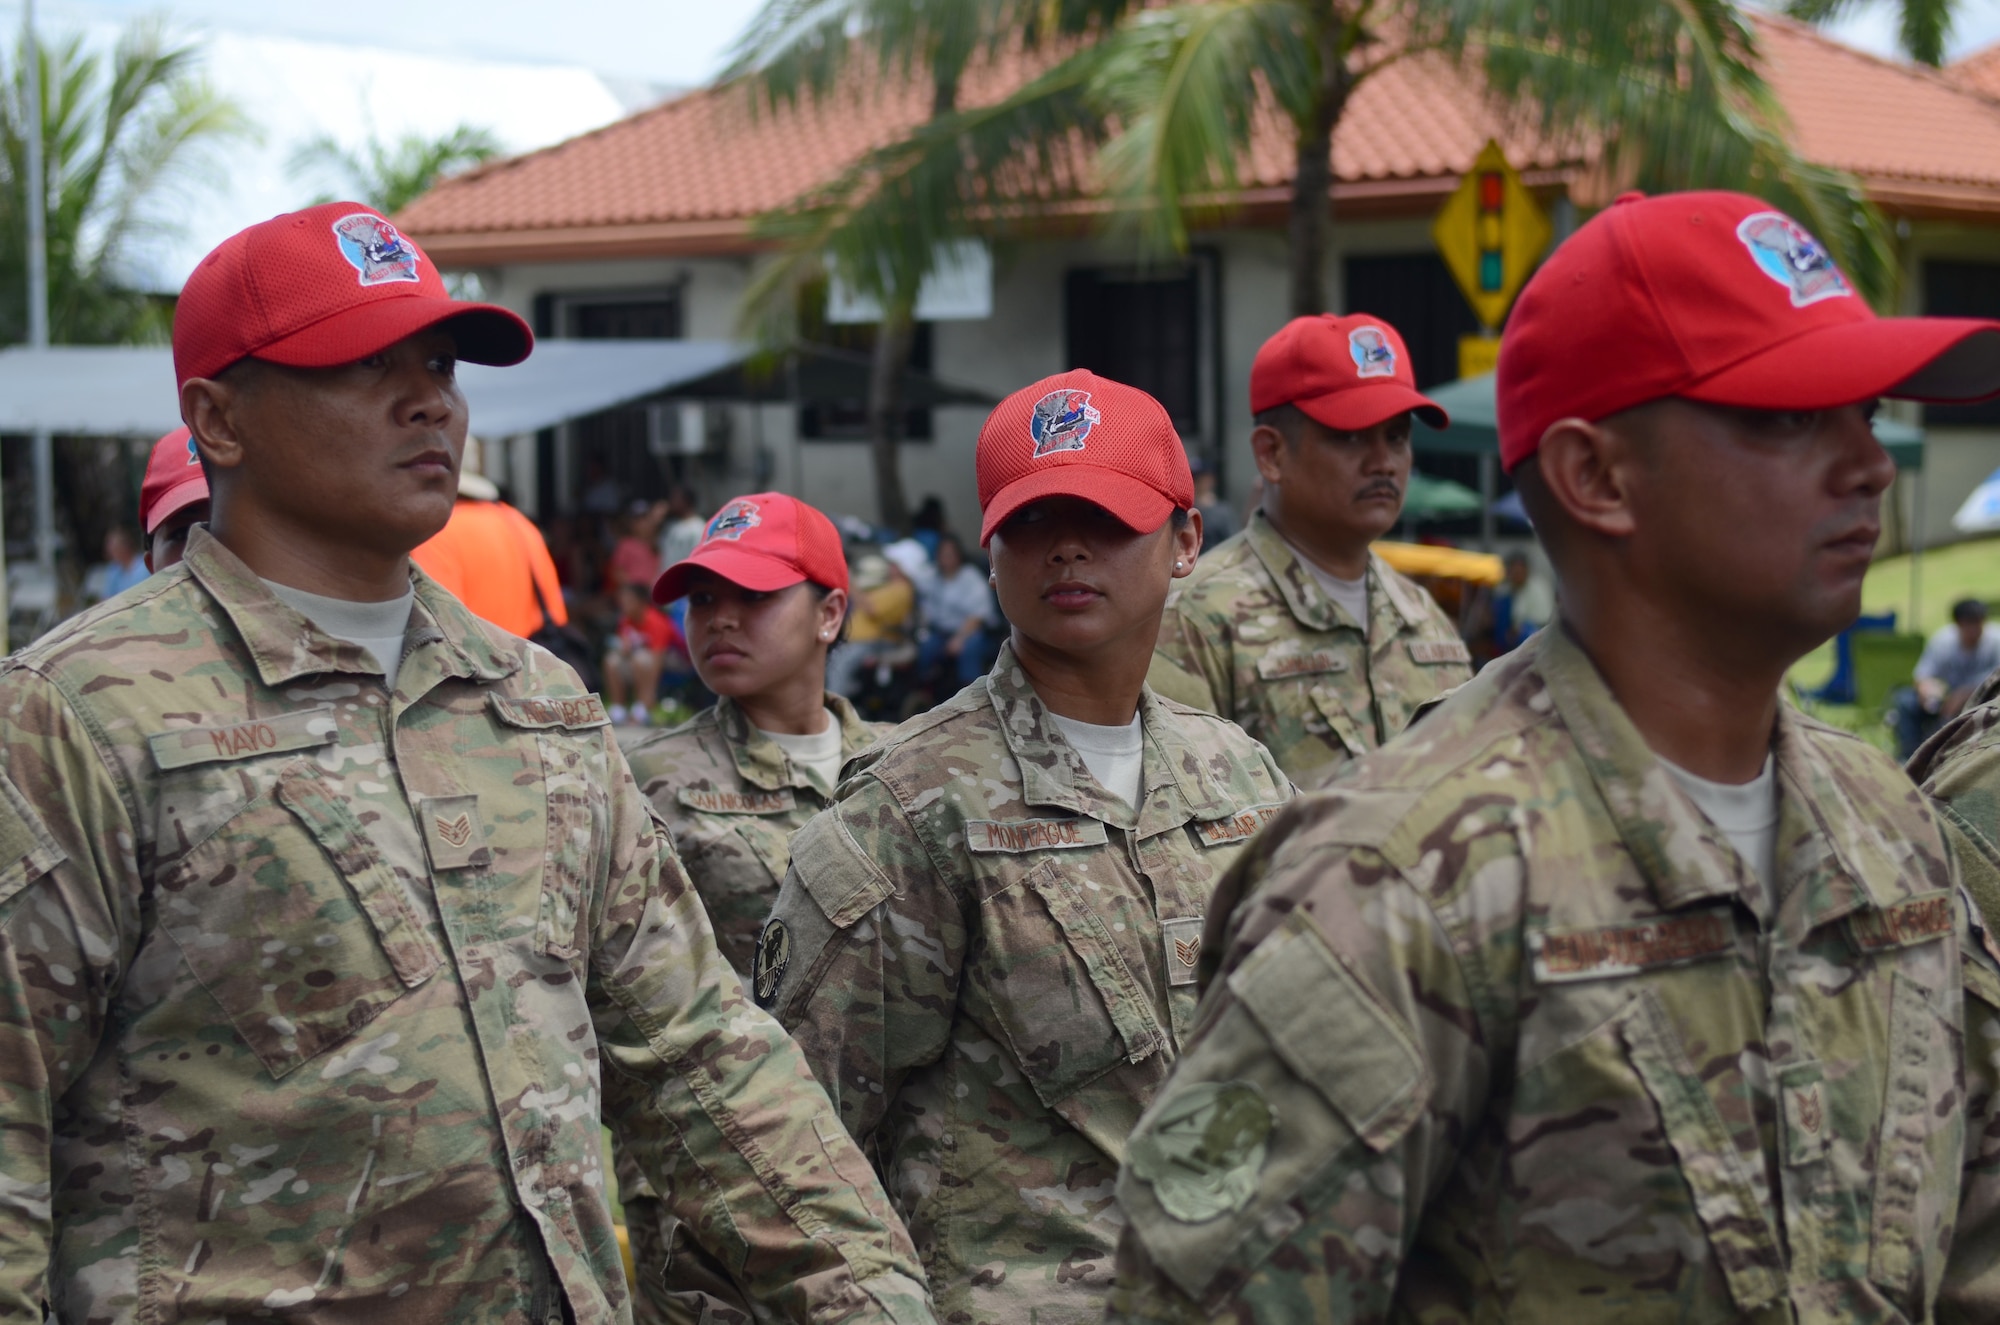 Airmen from the Guam Air National Guard’s 254th RED HORSE Squadron perform eyes right as they pass the 69th Guam Liberation Day Parade review stand in Hagåtña, Guam, July 21, 2013. Formations of active-duty service members, guardsmen and reservists, including more than 140 Airmen from the 36th Wing, led the parade down the 1.2-mile route past thousands of spectators. The parade commemorated the United States freeing the island from imperial Japan’s control during the Second Battle of Guam, which began July 21, 1944, and lasted 21 days. (U.S. Air Force photo by Staff Sgt. Brok McCarthy/Released)